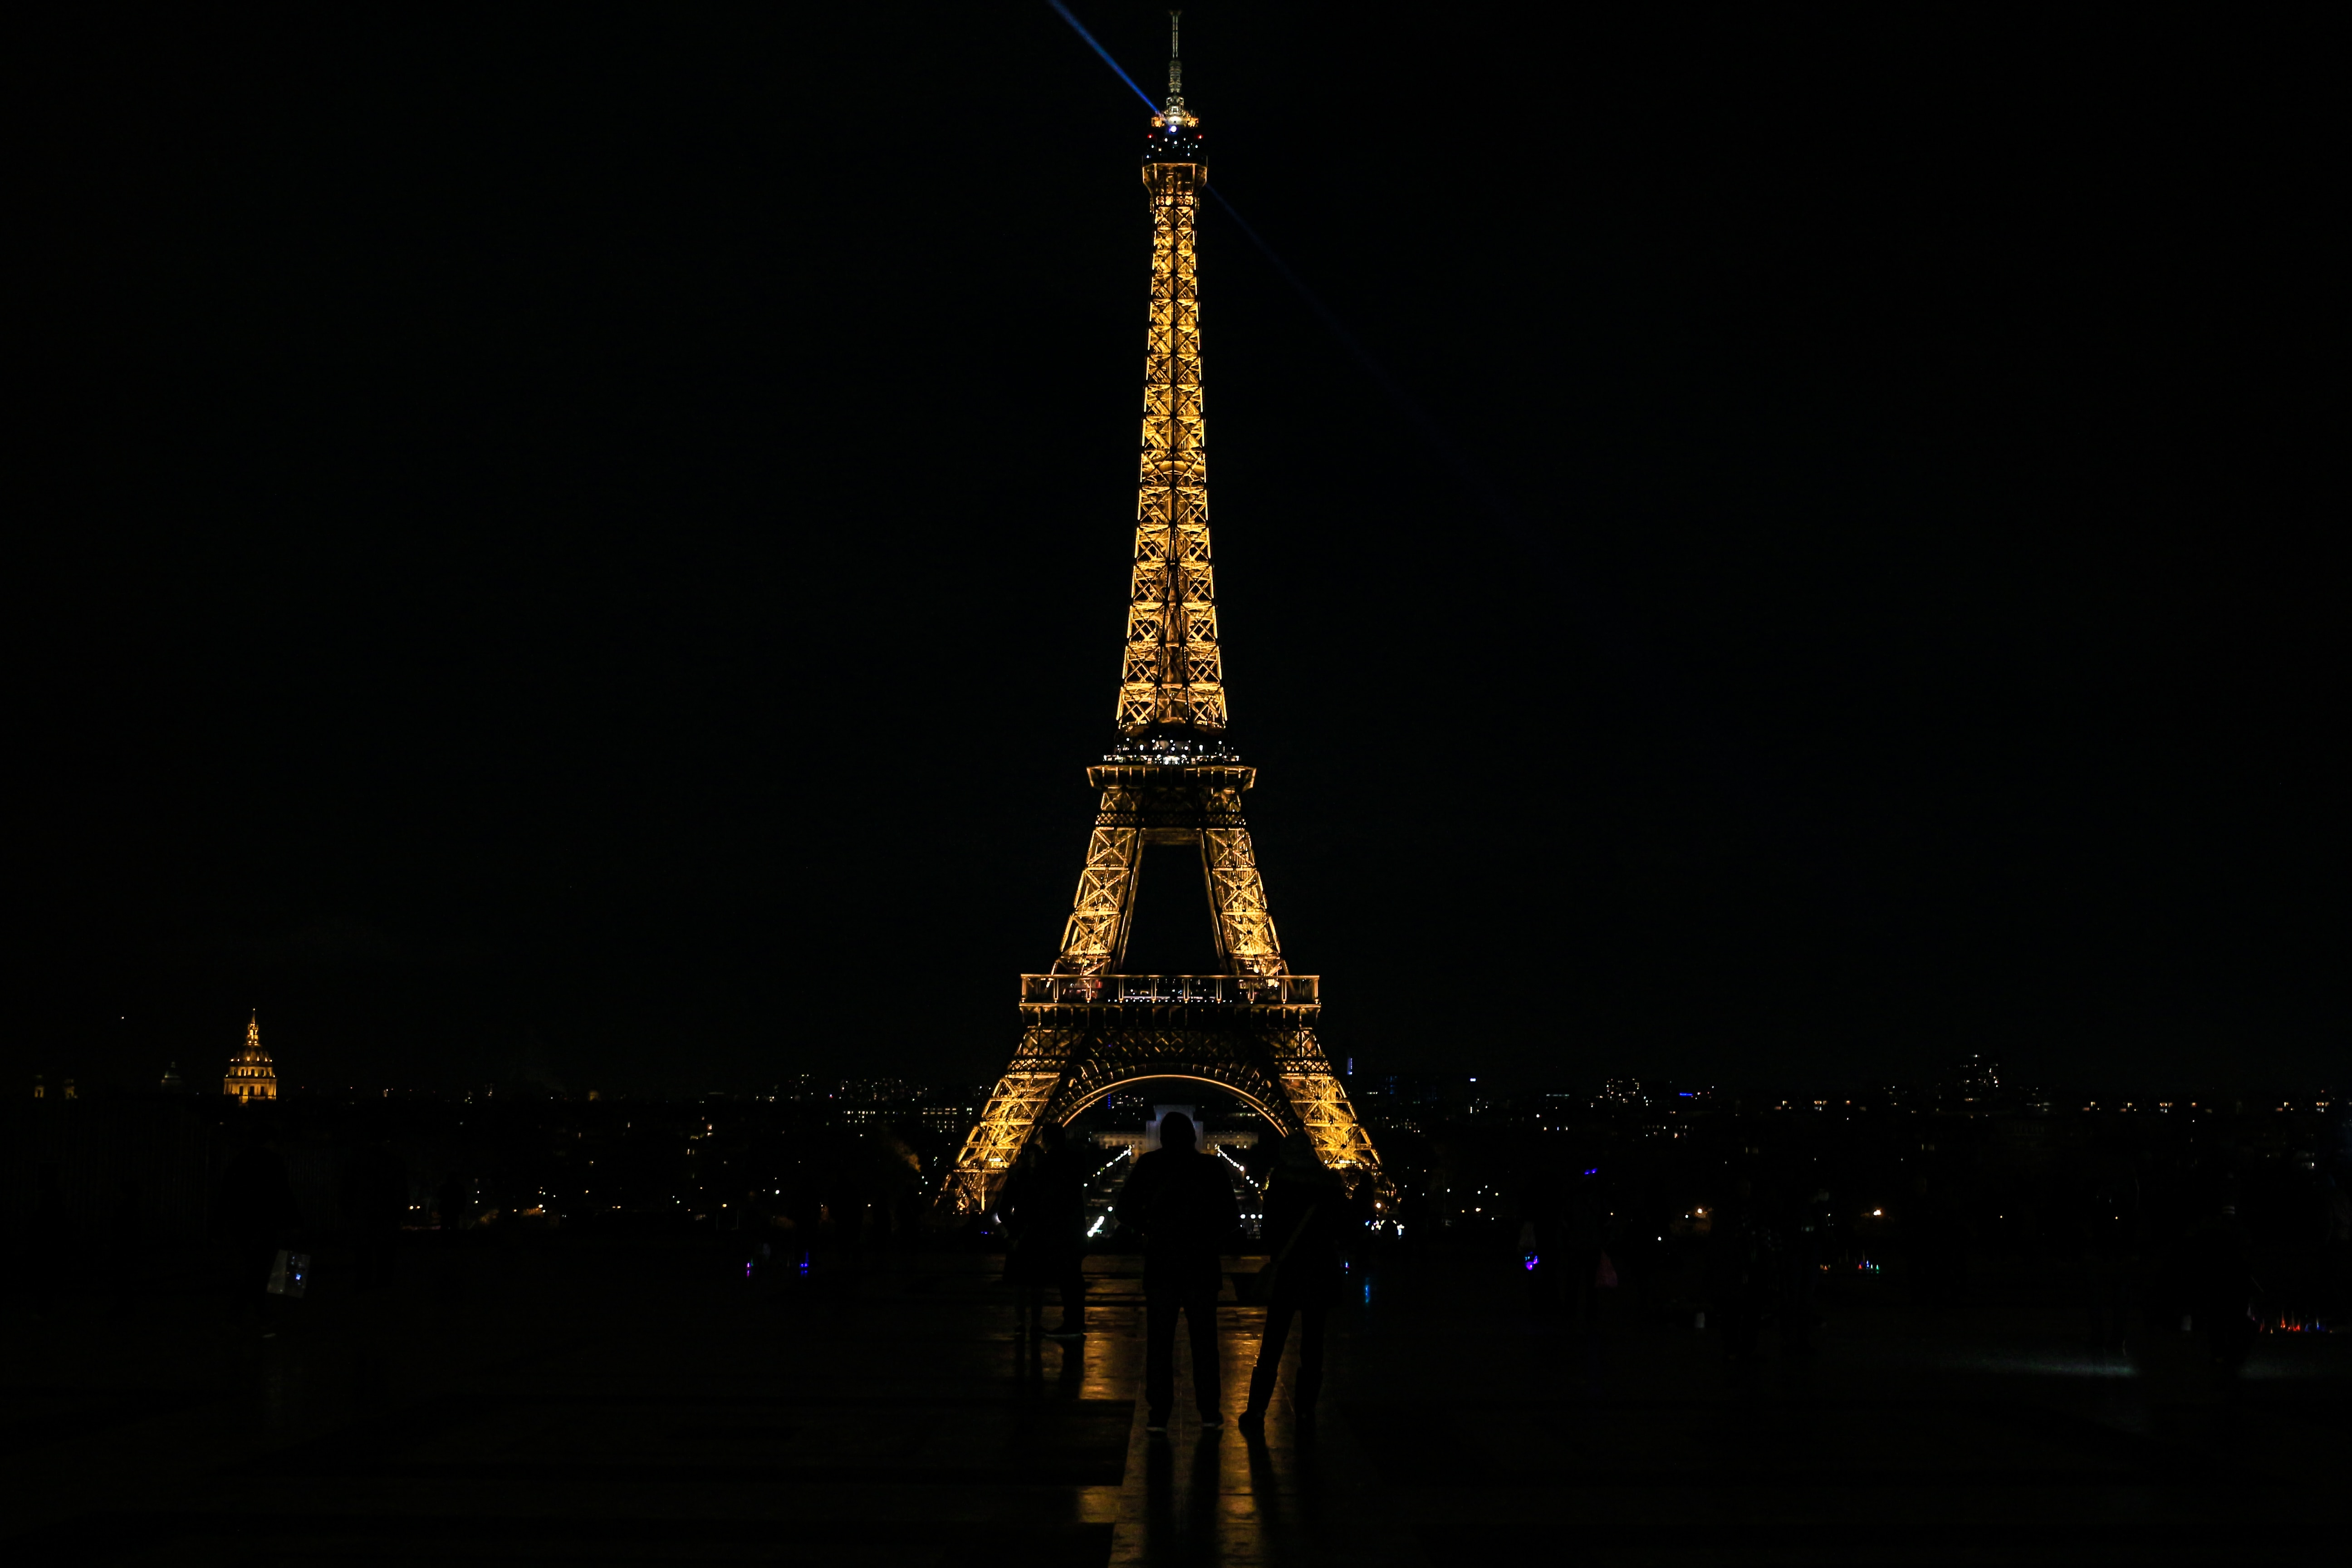 eiffel towel with lights during nighttime